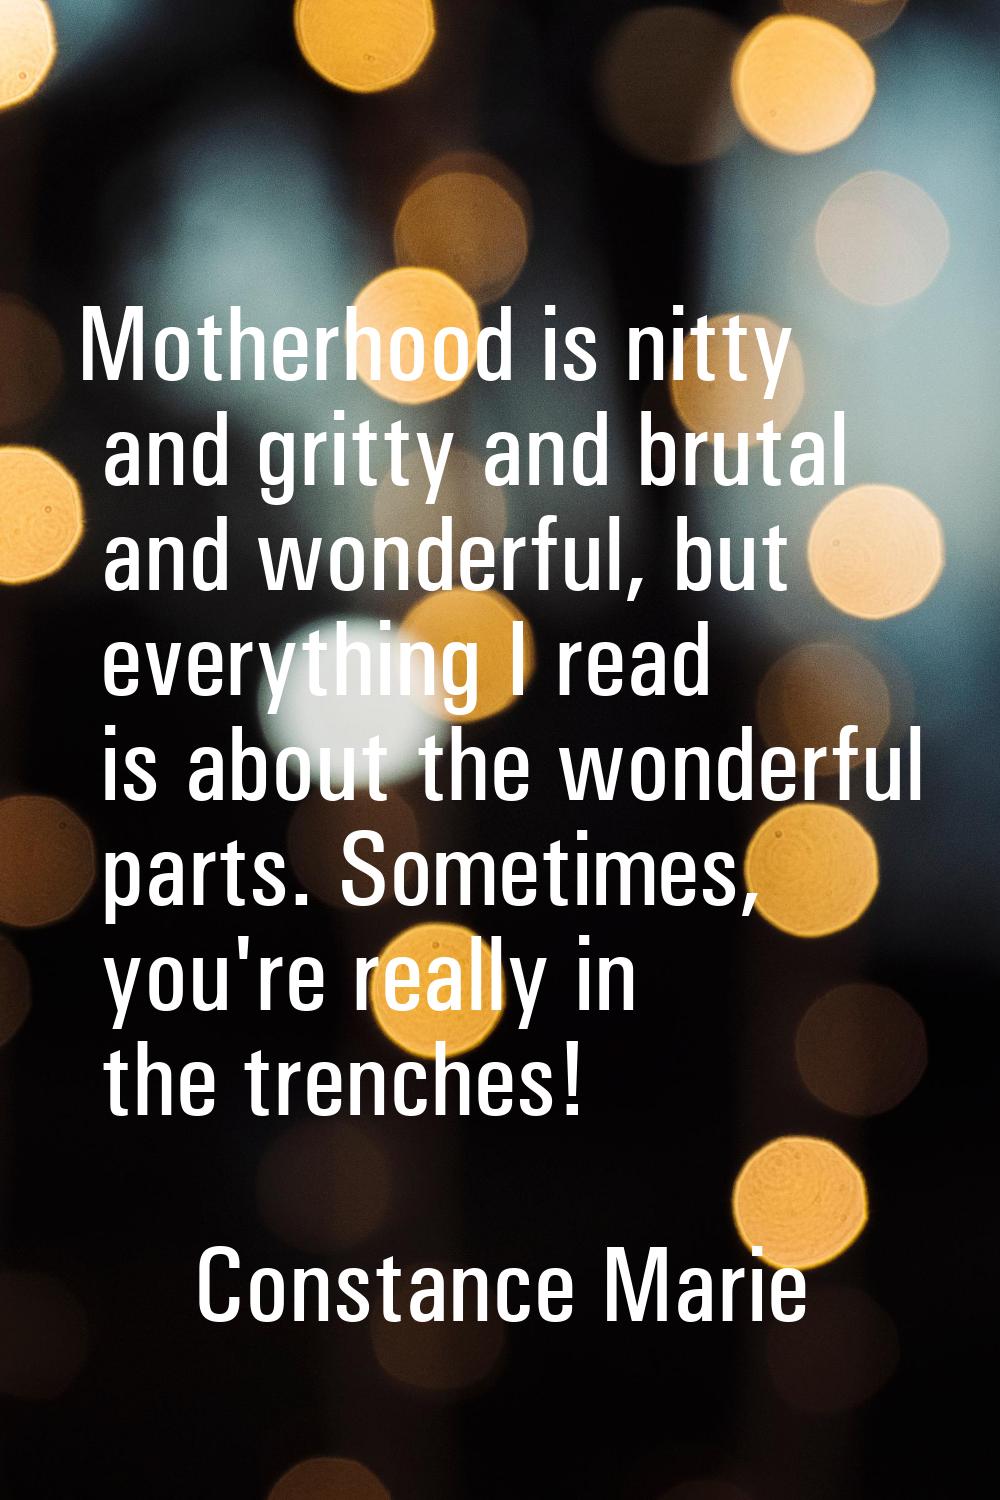 Motherhood is nitty and gritty and brutal and wonderful, but everything I read is about the wonderf